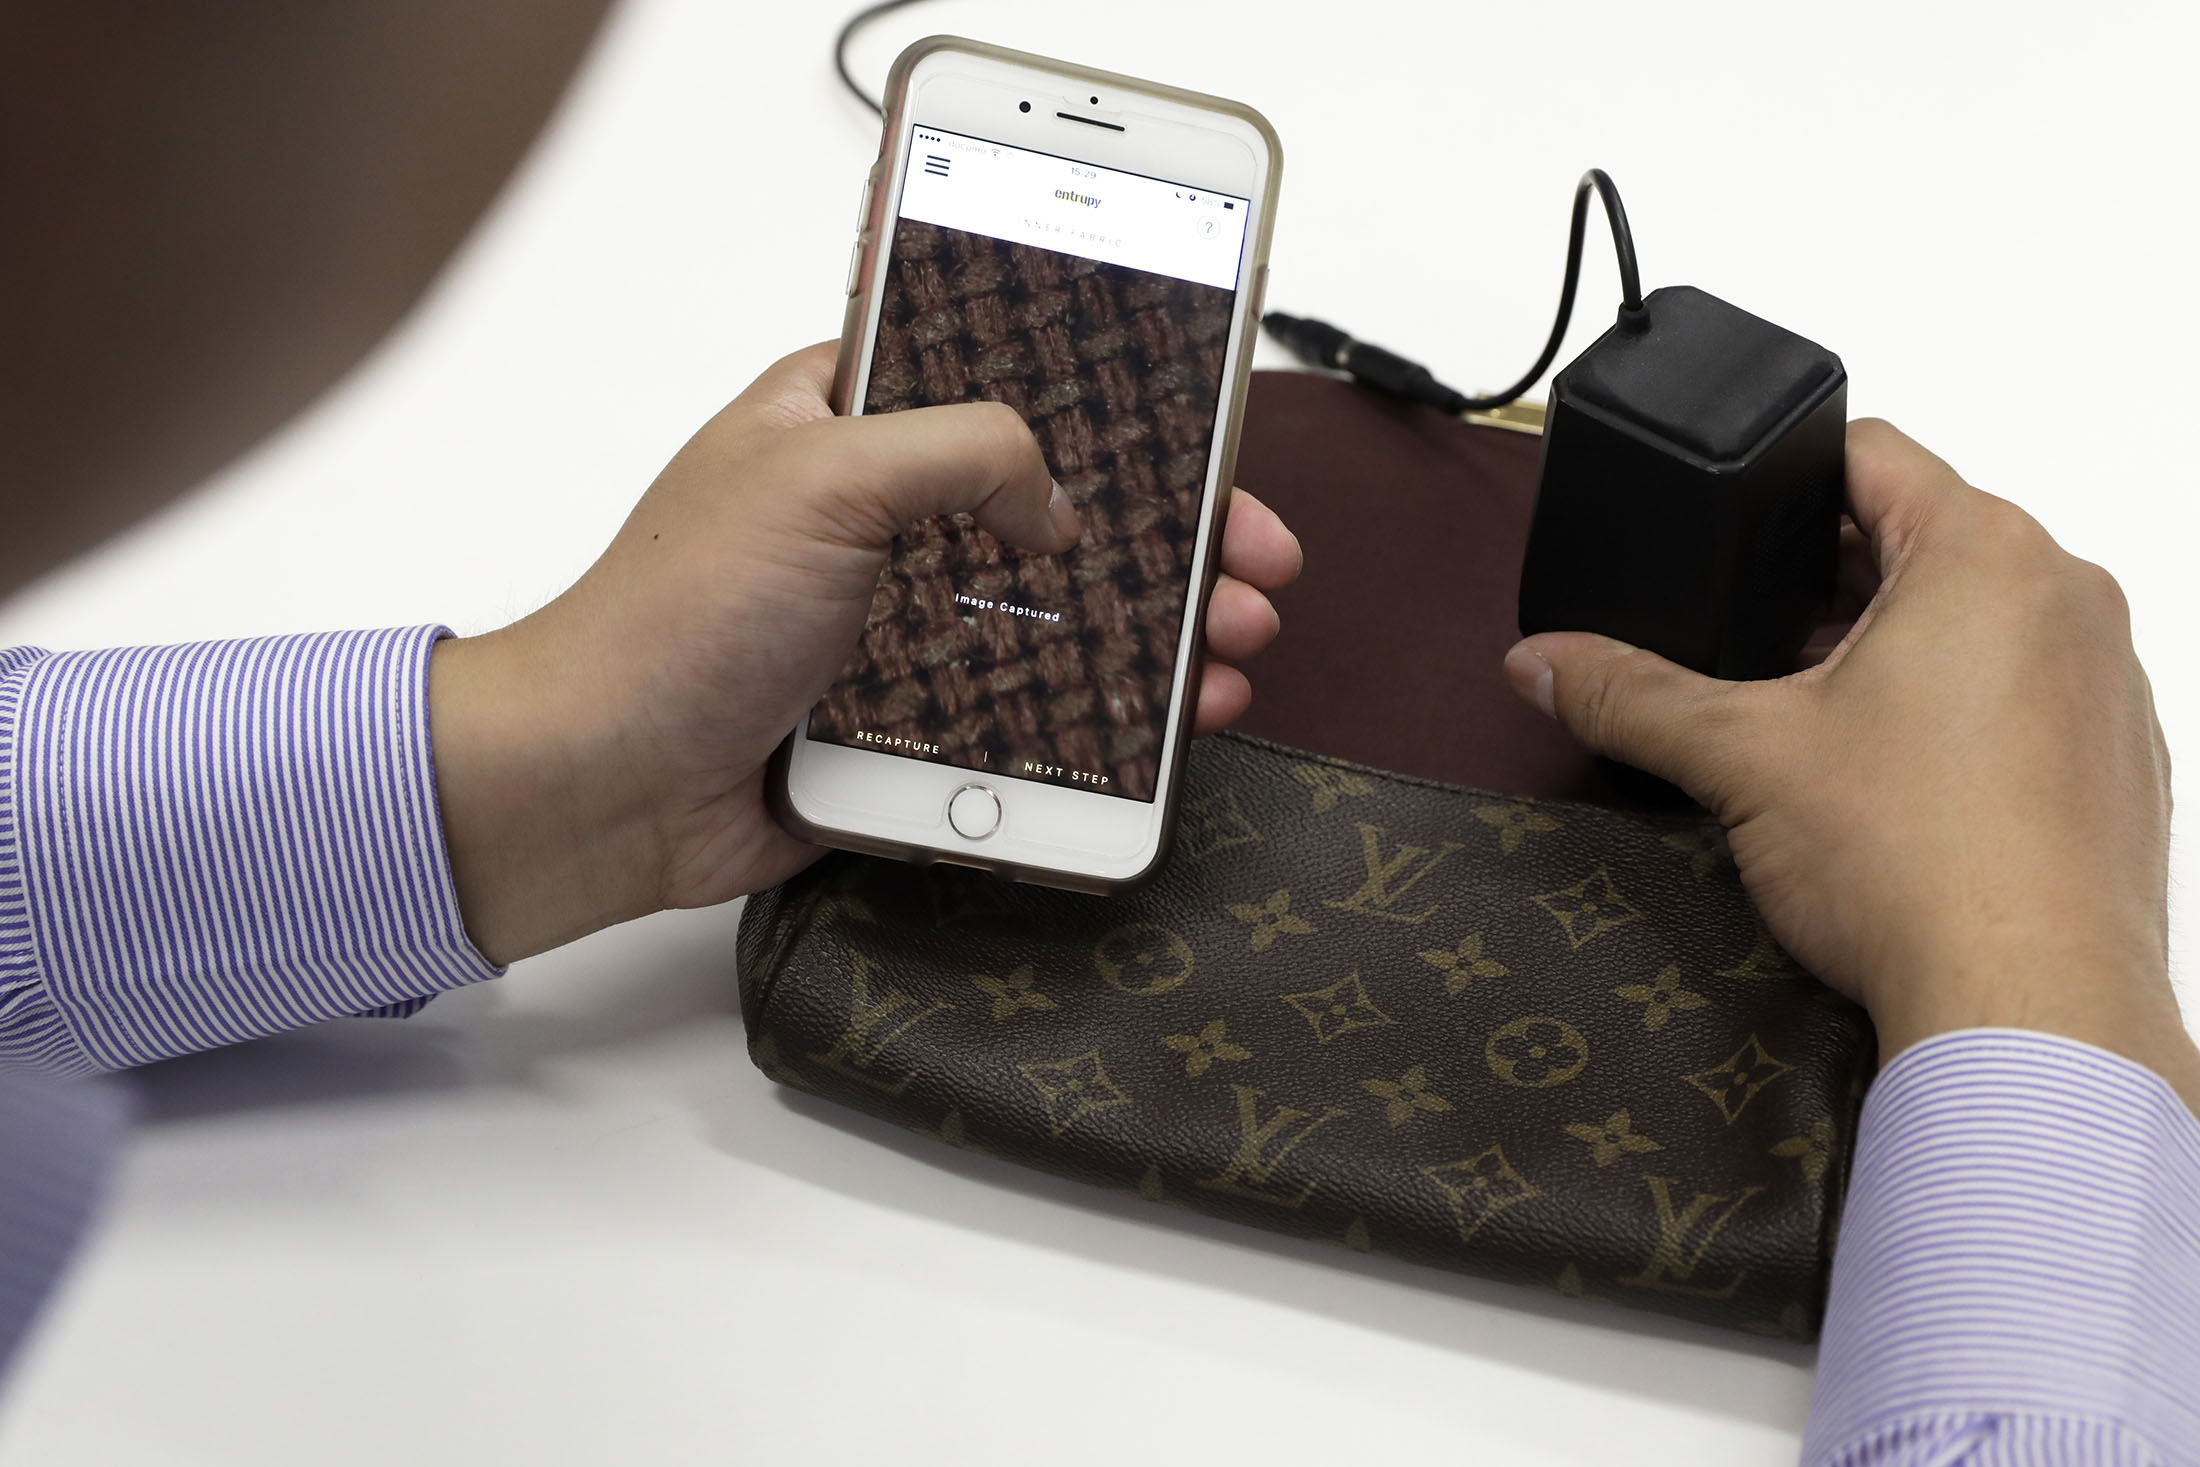 Entrupy: The AI device that can detect counterfeit handbags, Science